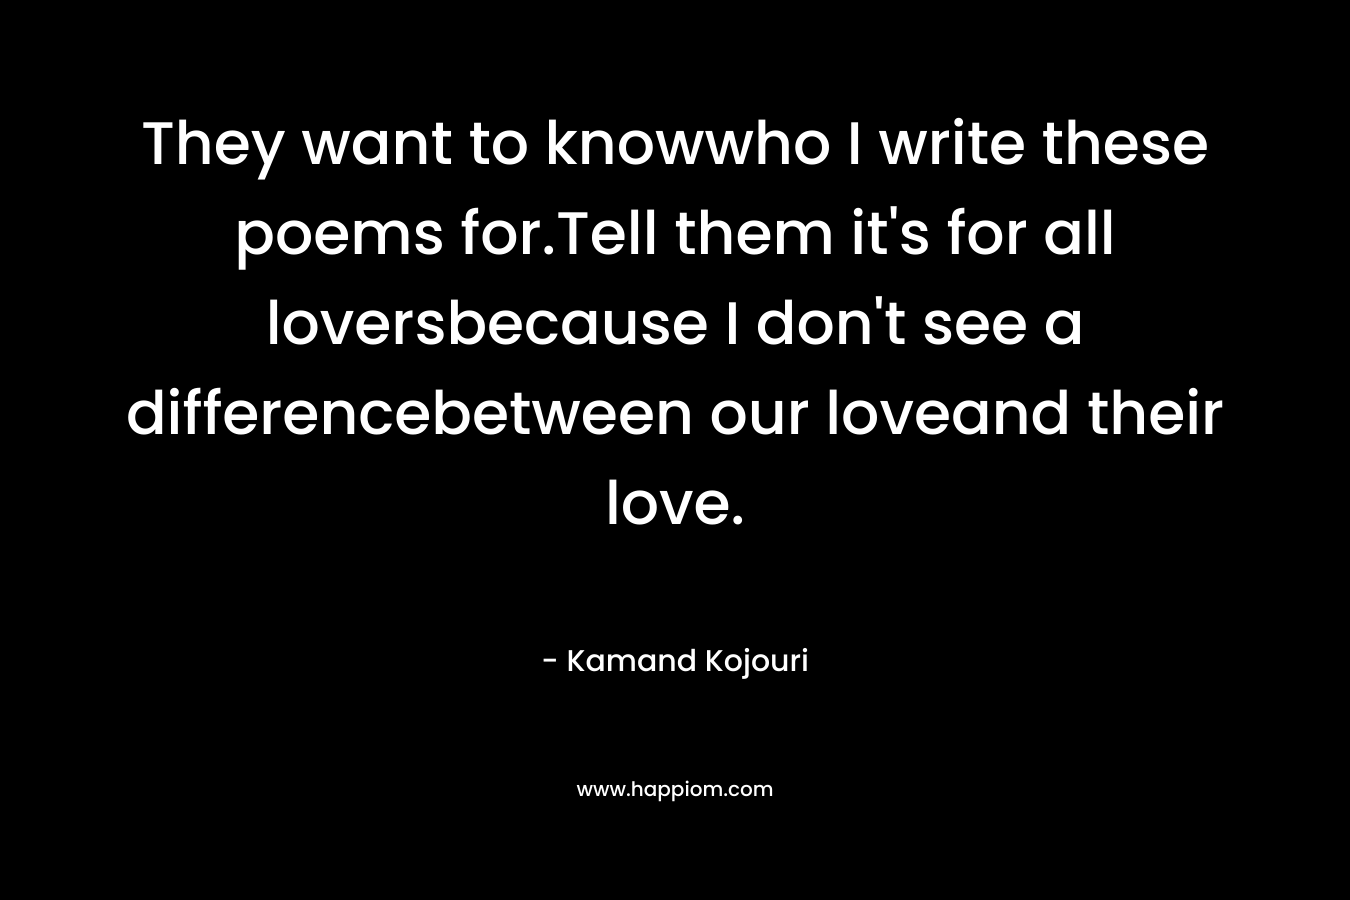 They want to knowwho I write these poems for.Tell them it's for all loversbecause I don't see a differencebetween our loveand their love.